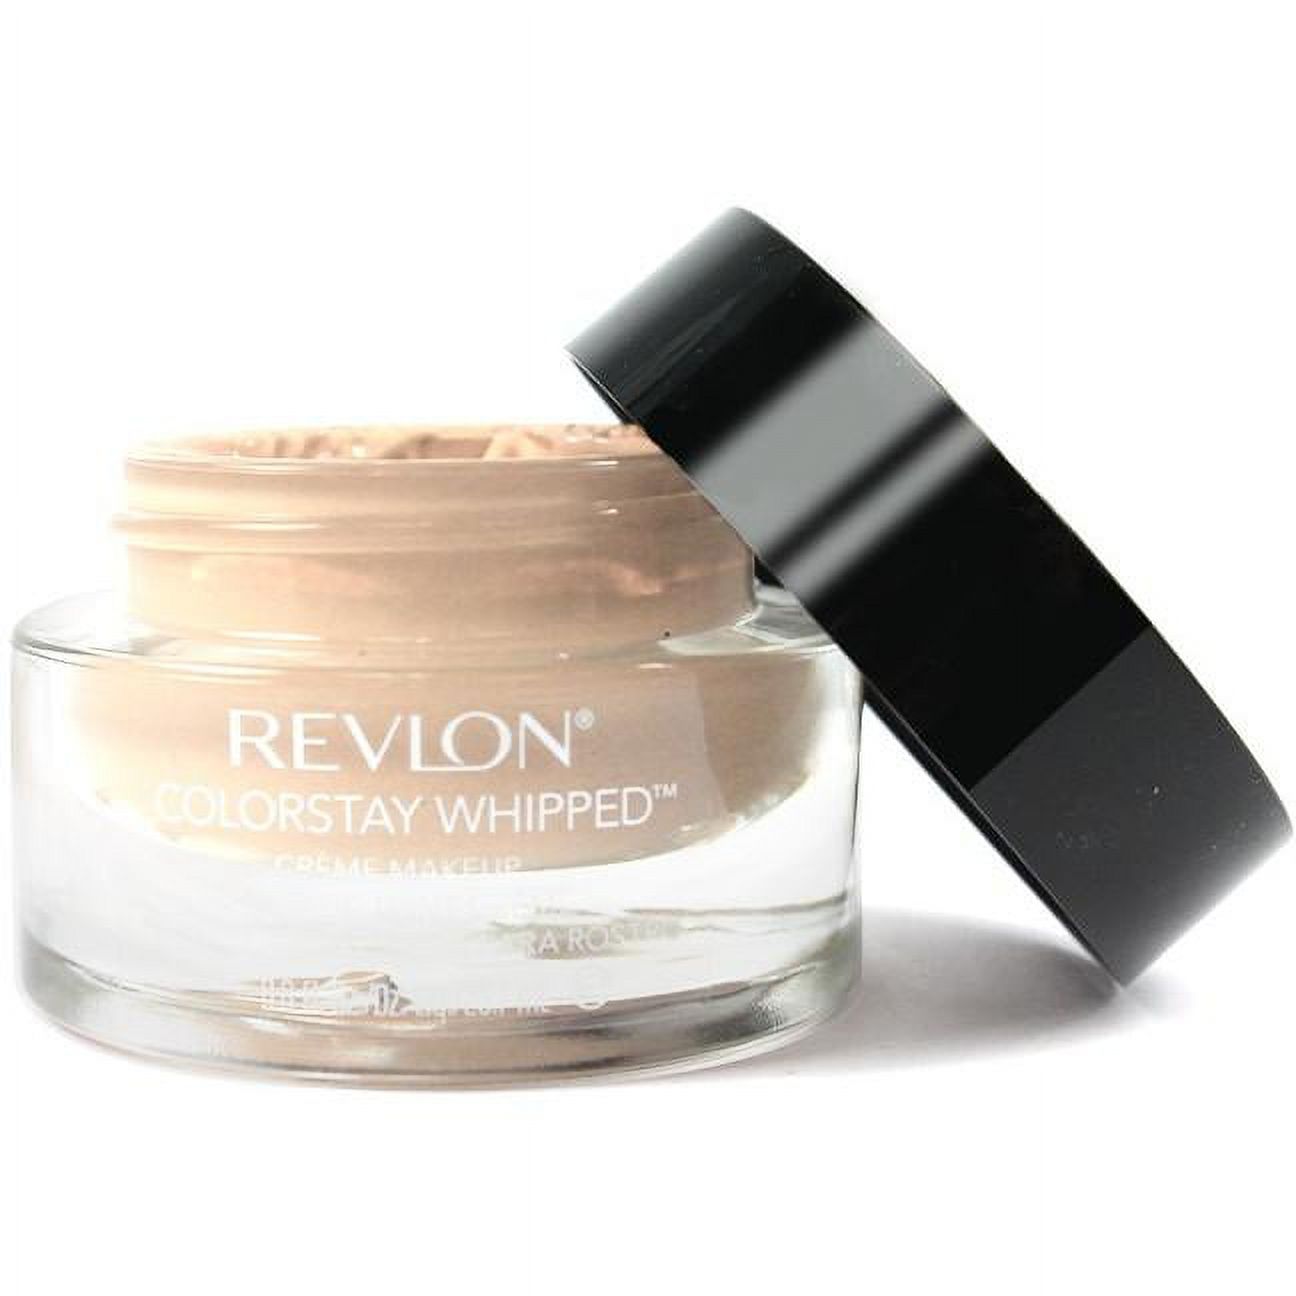 Revlon ColorStay Whipped Creme Makeup, Warm Golden - image 4 of 15